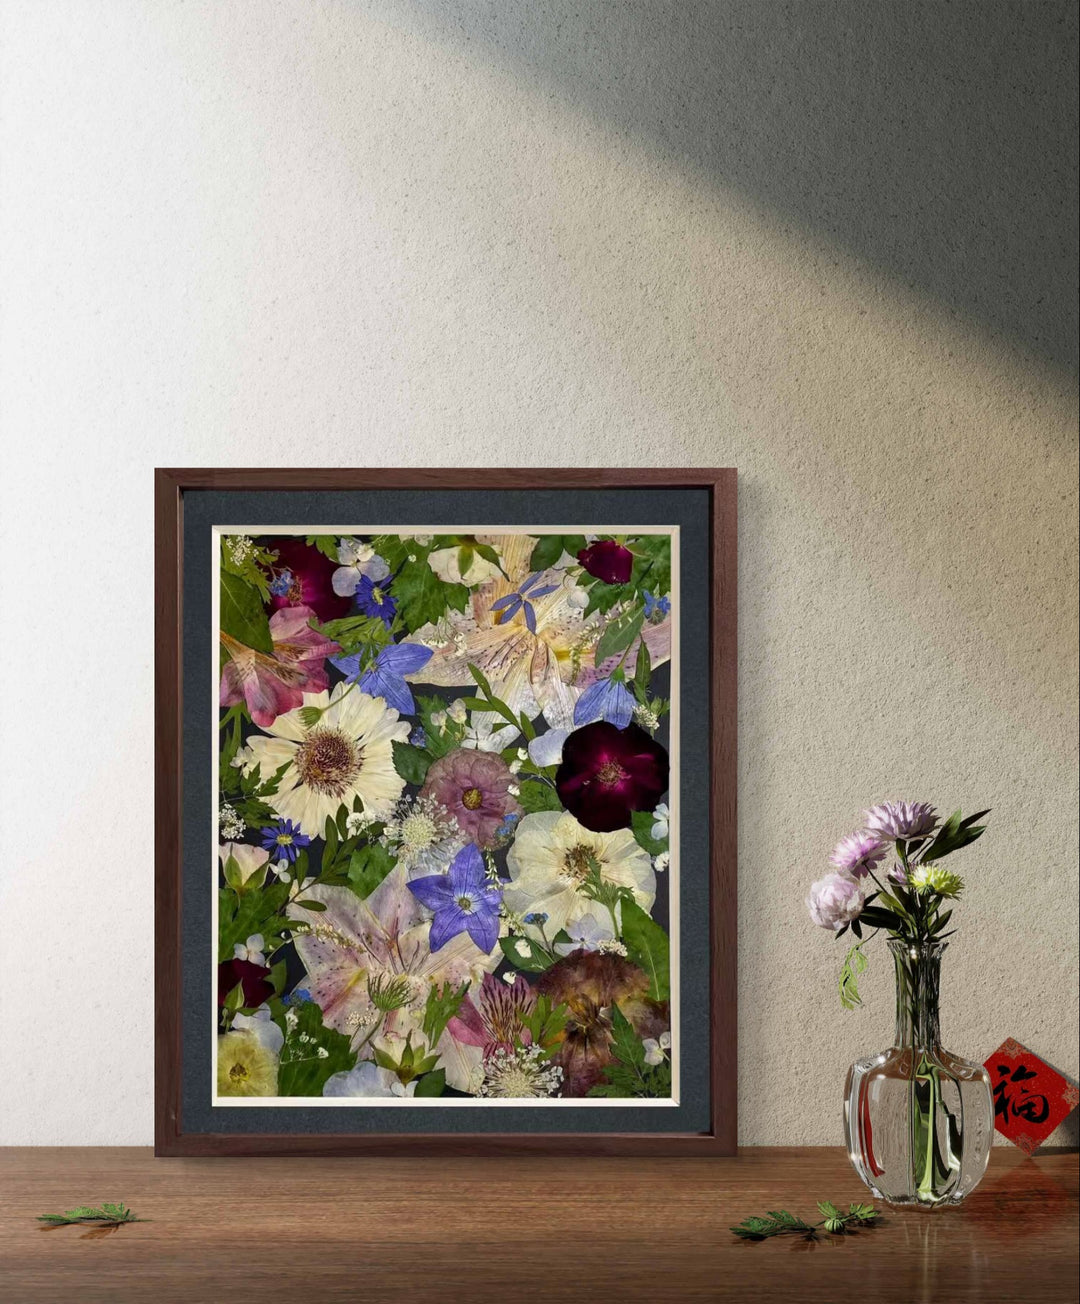 Sparkle stars theme 11 inches width 12.5 inches height pressed flower frame art stands on the wood table. 